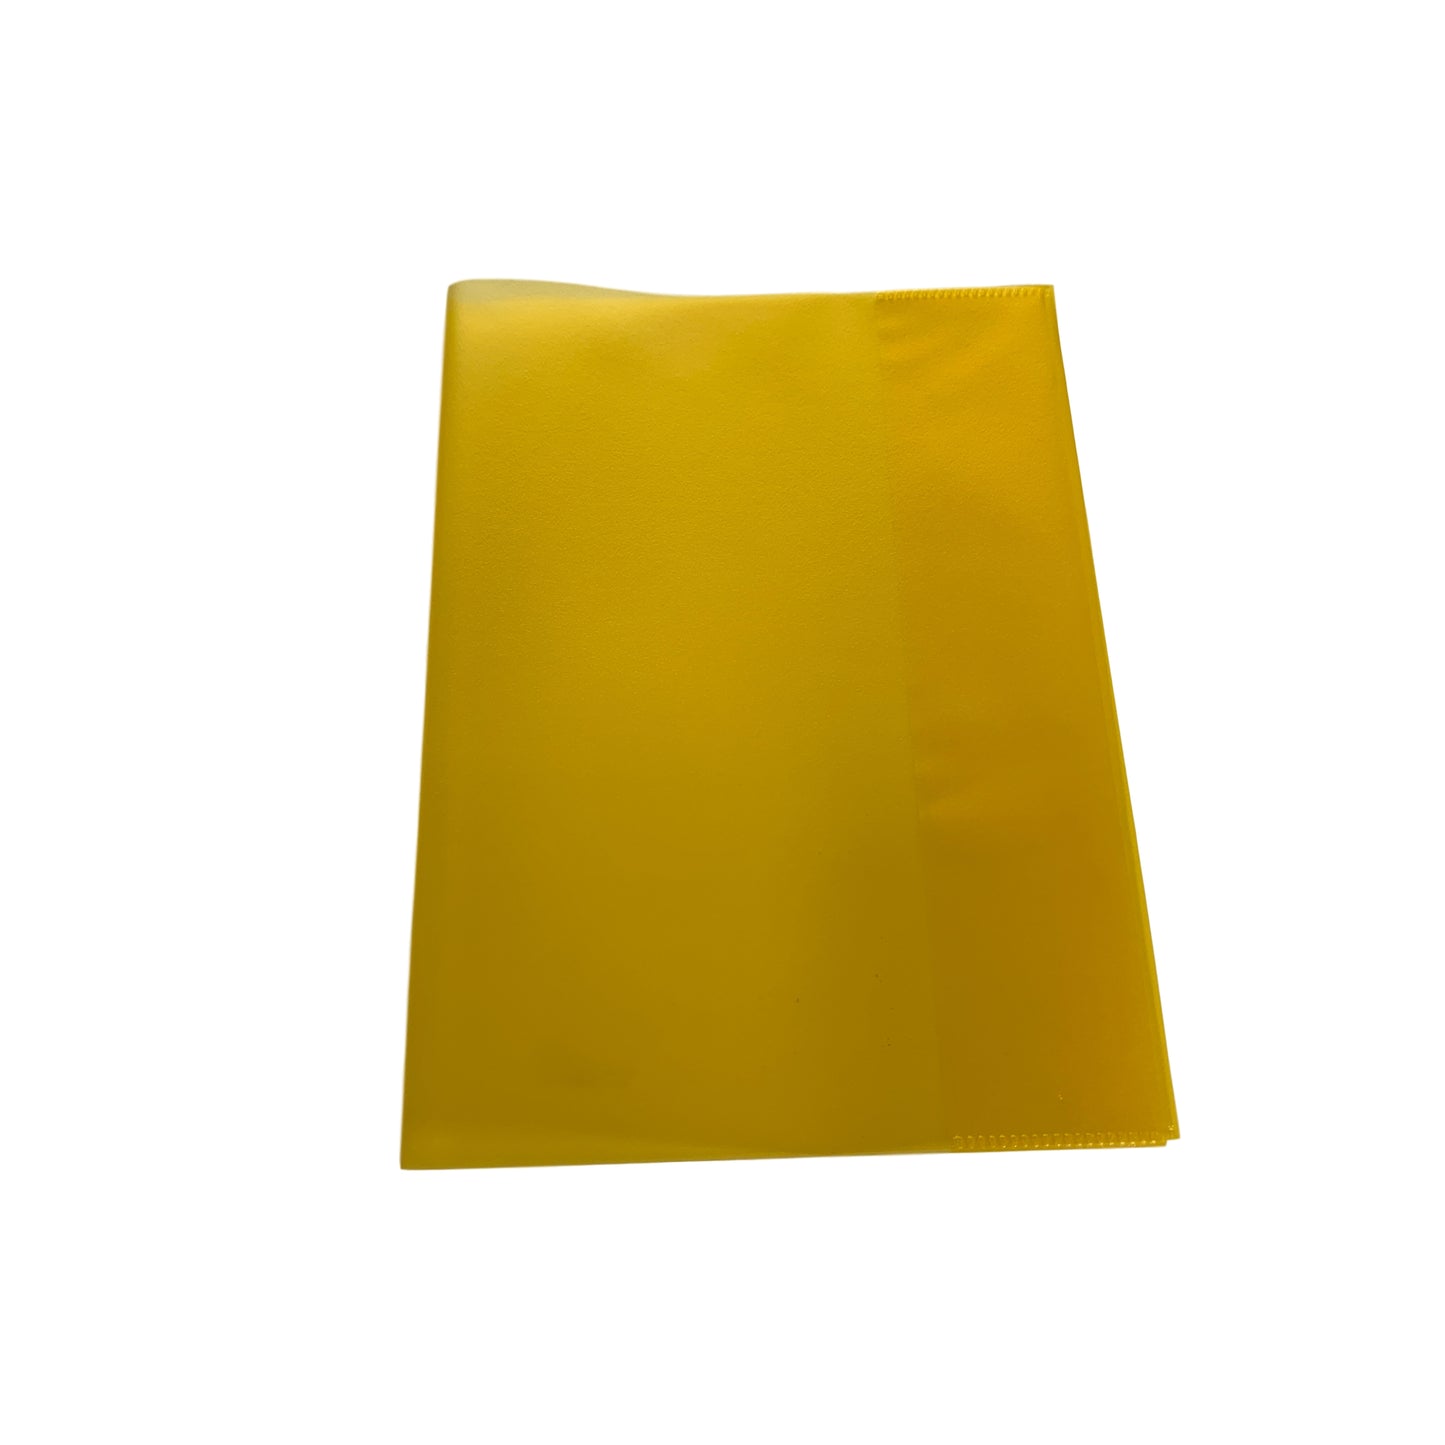 Pack of 10 9x7" Frosted Yellow Exercise Book Covers